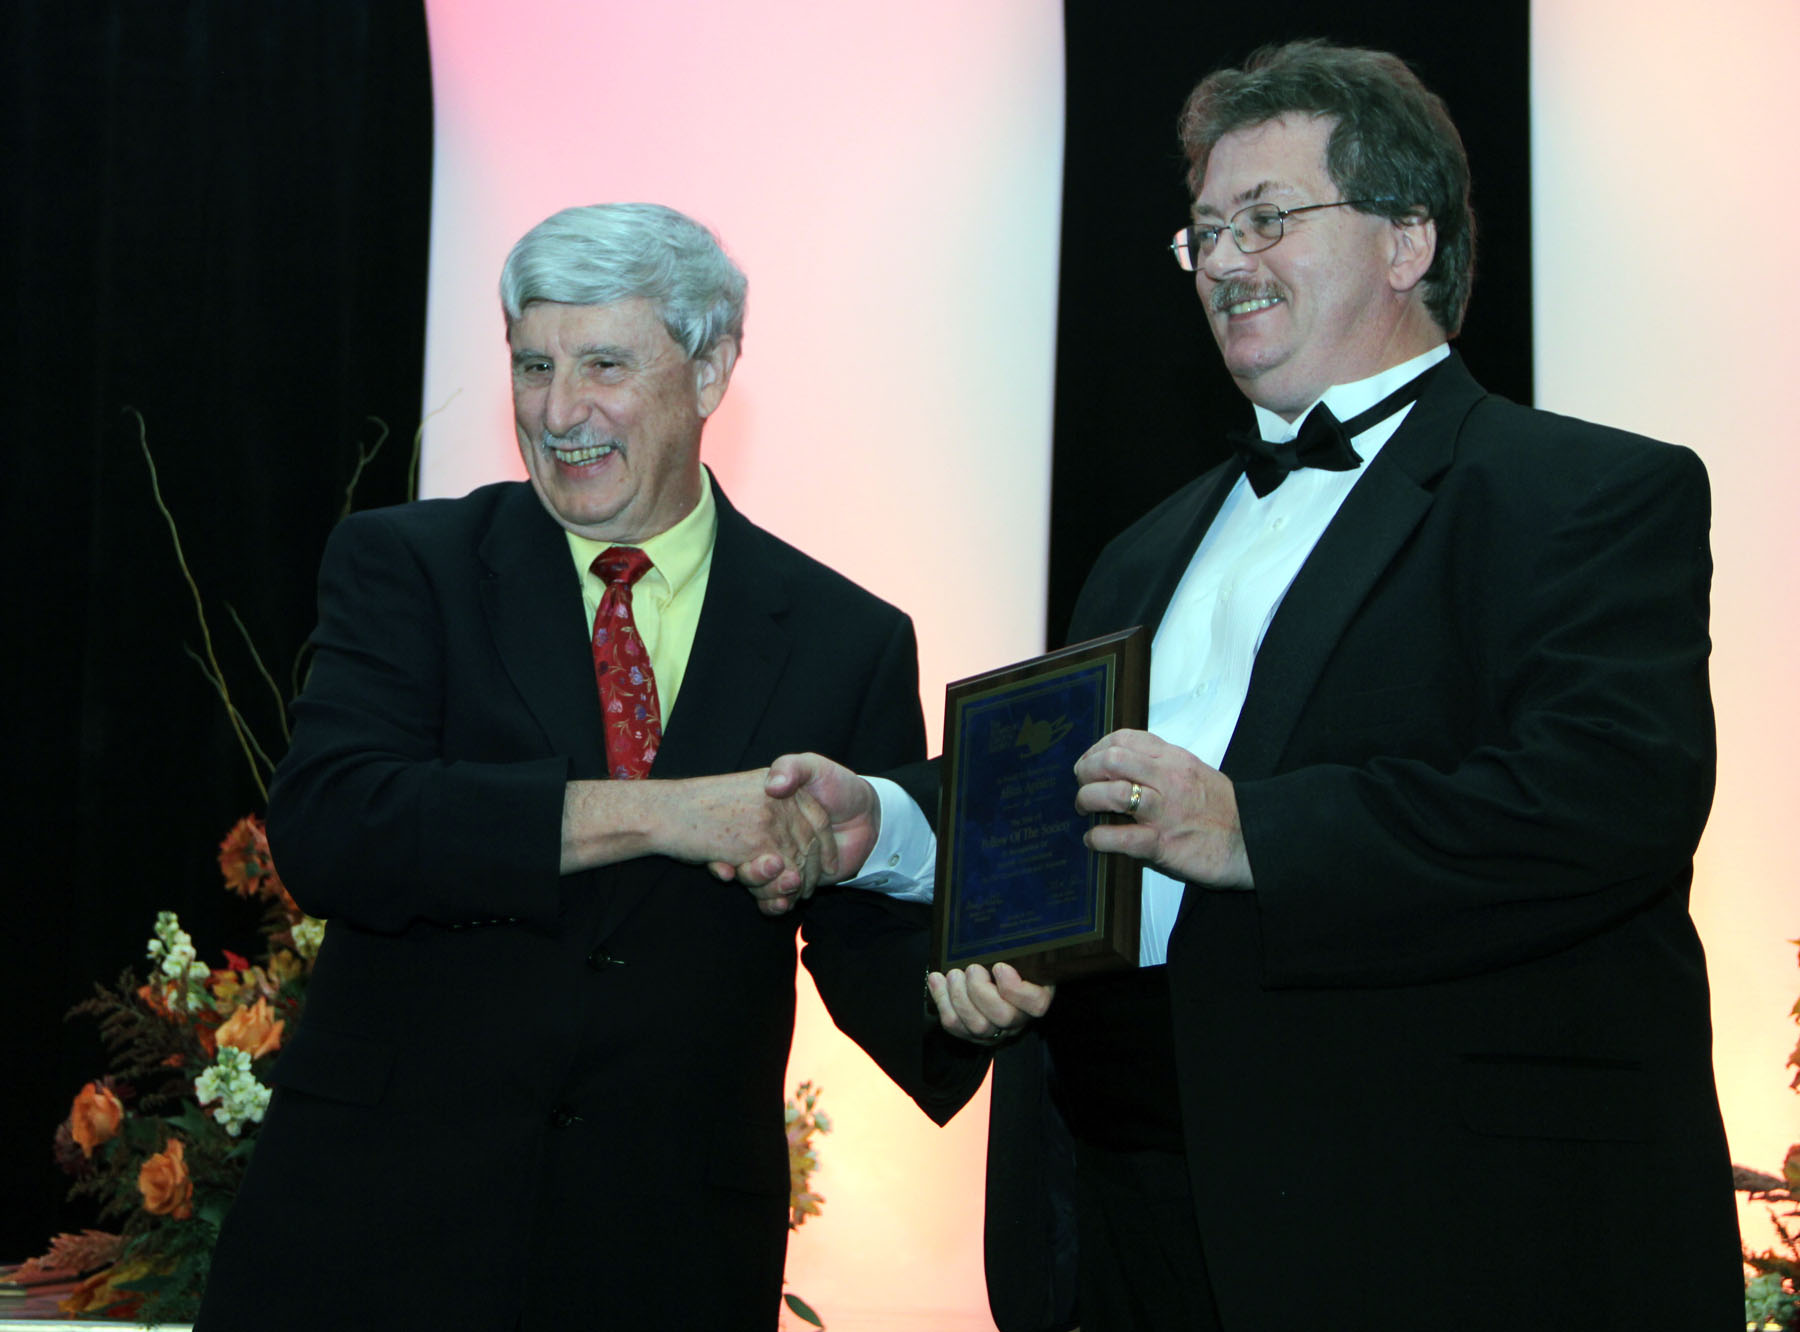 George Wicks, president of the American Ceramic Society, awards a plaque to Dr. Allen Apblett formally recognizing Apblett as a Fellow in the society.